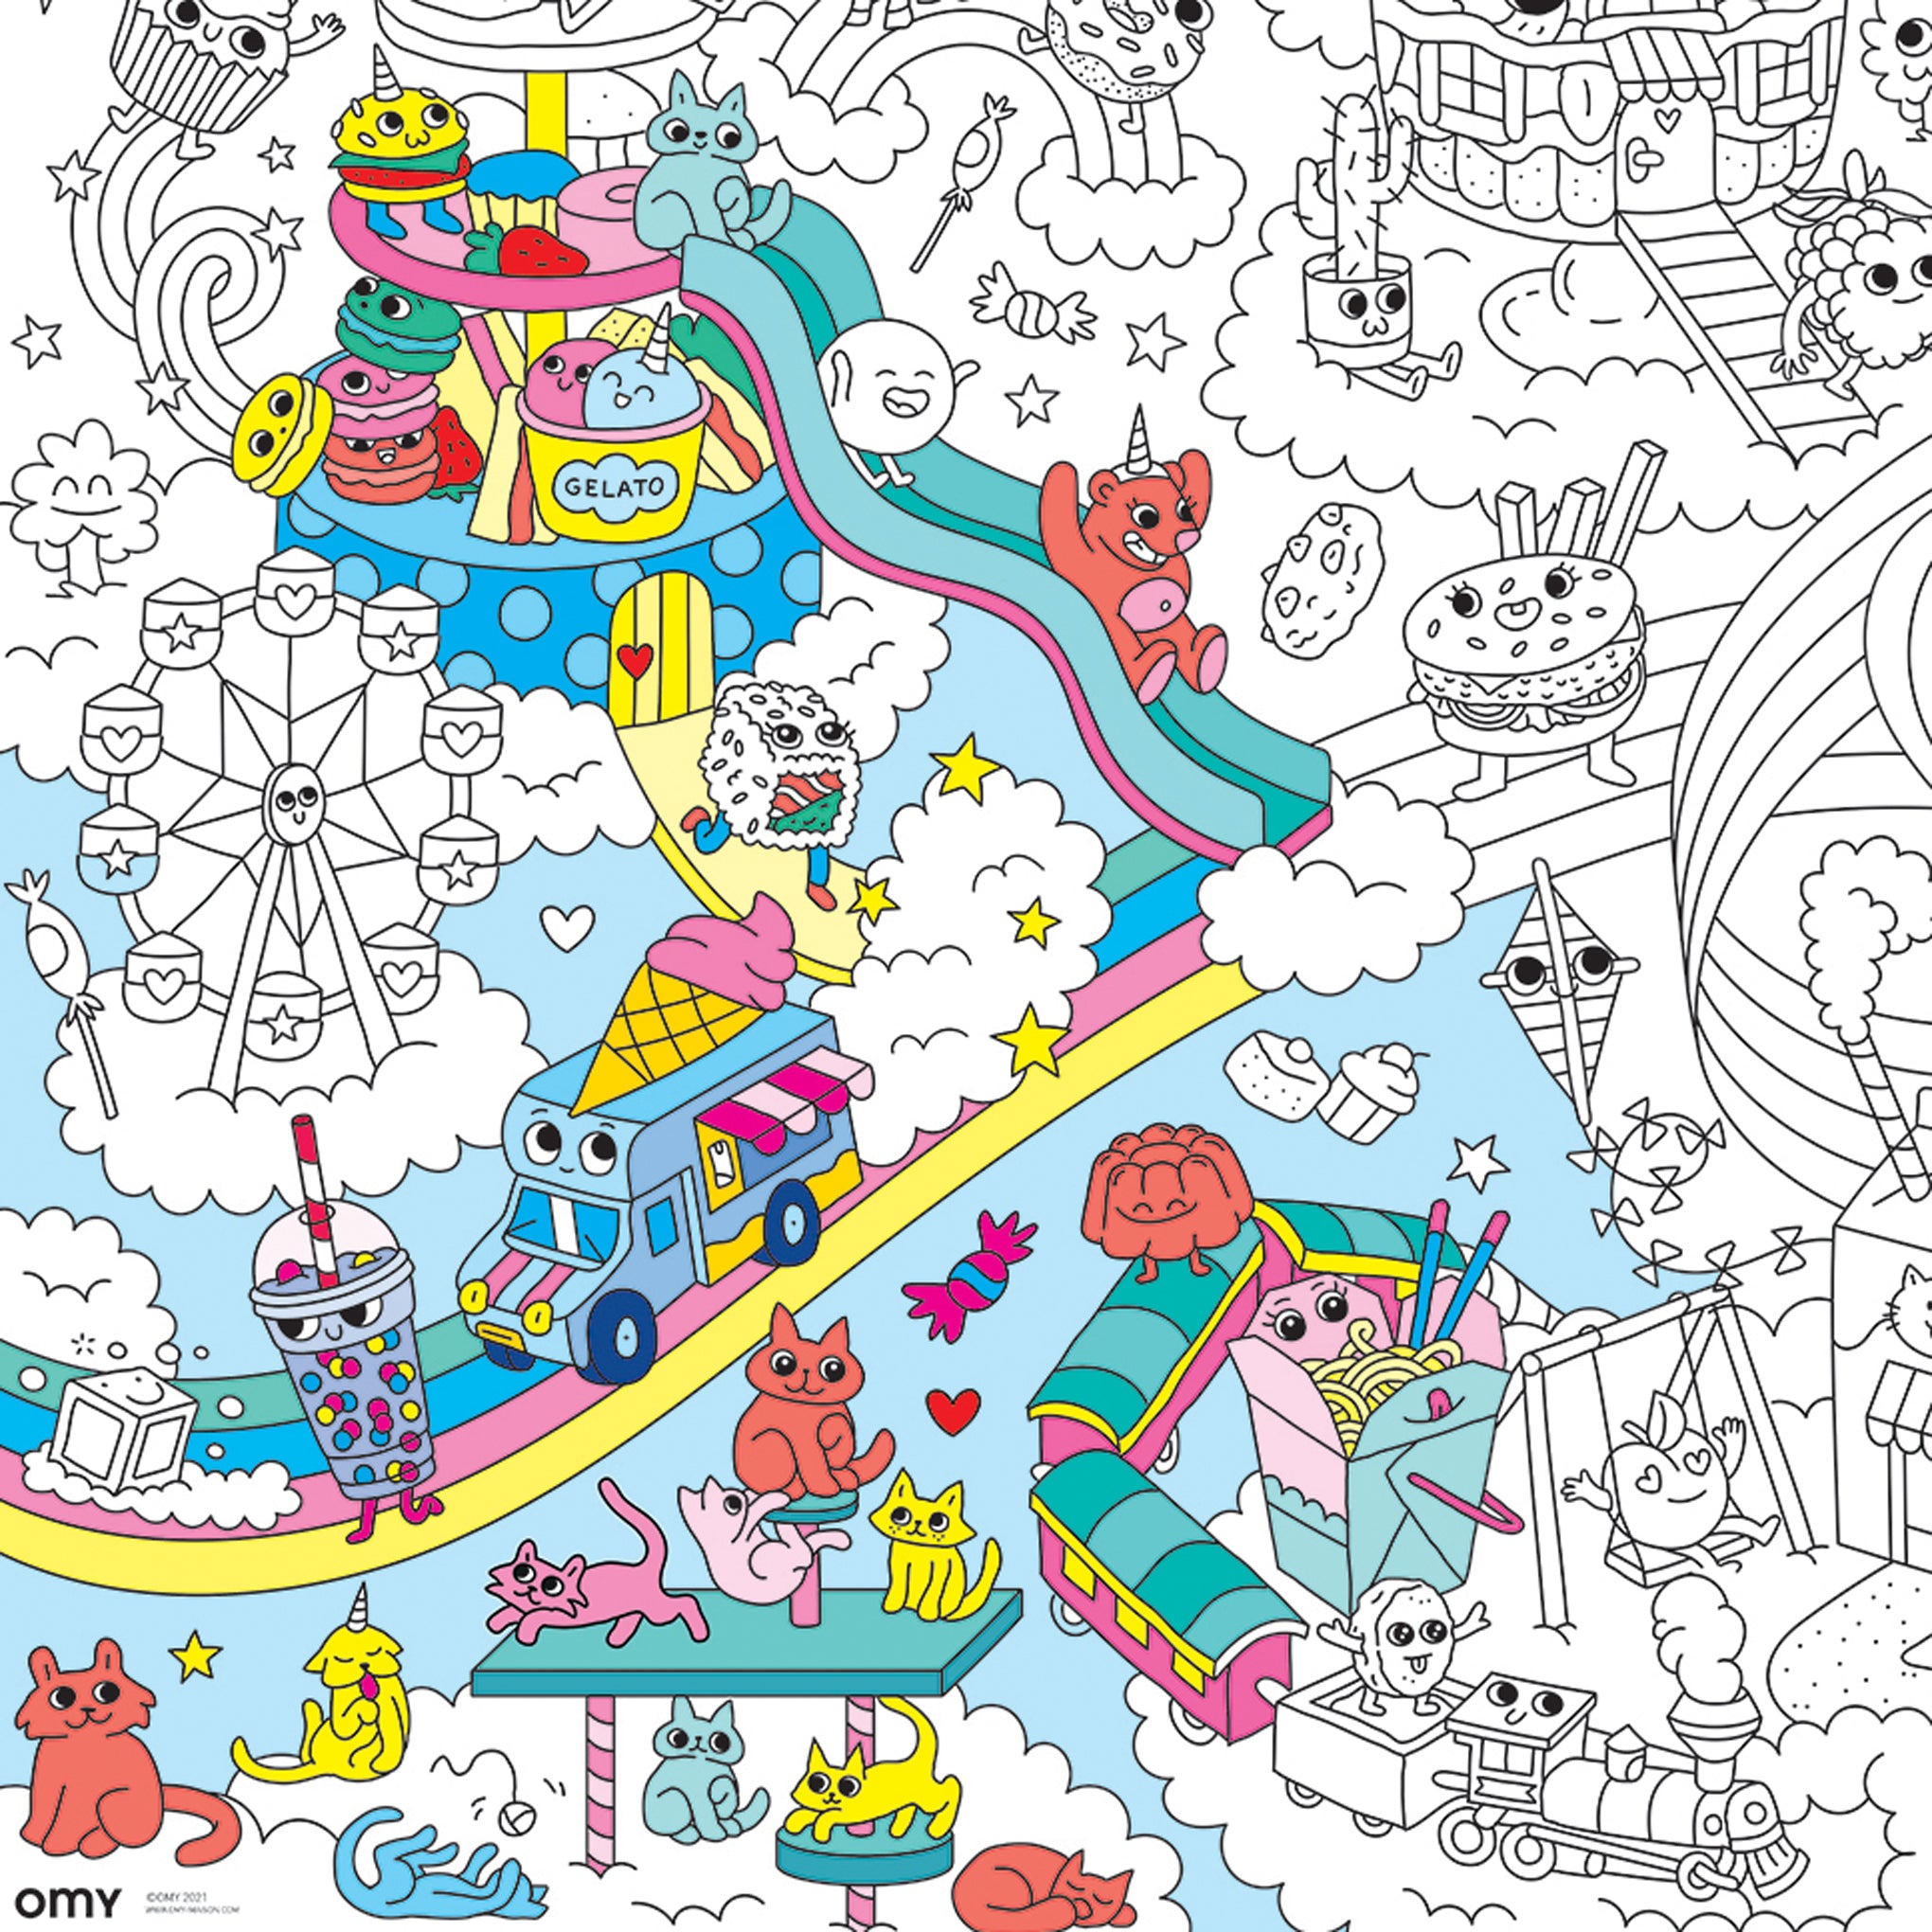 OMY Space Station Giant Coloring Poster